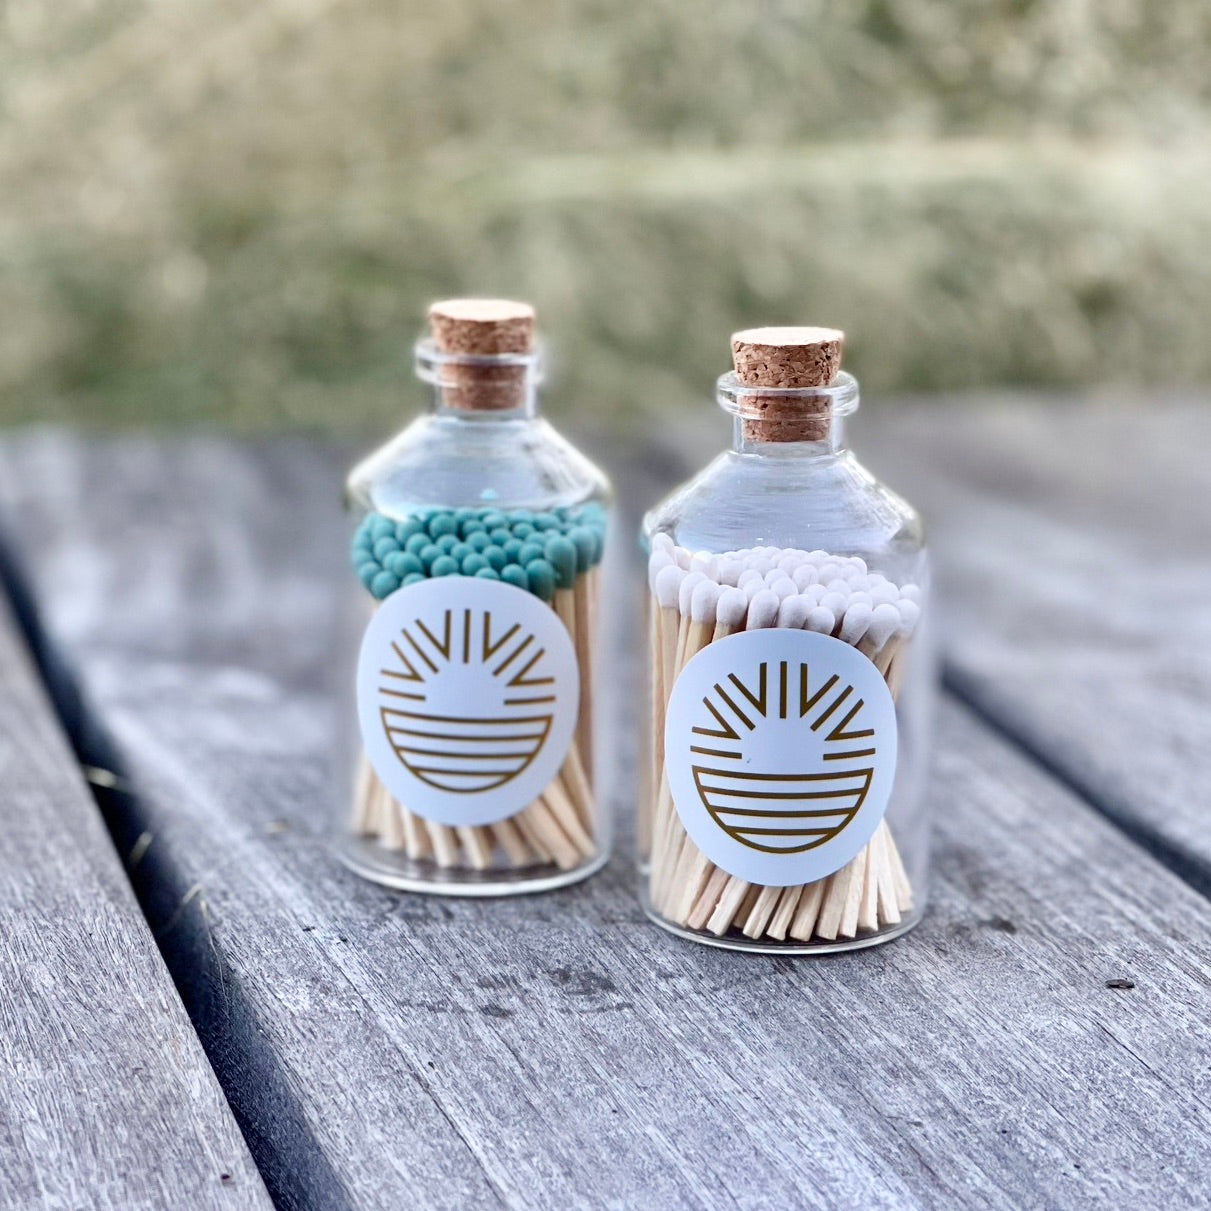 Decorative Matches in Glass Bottles